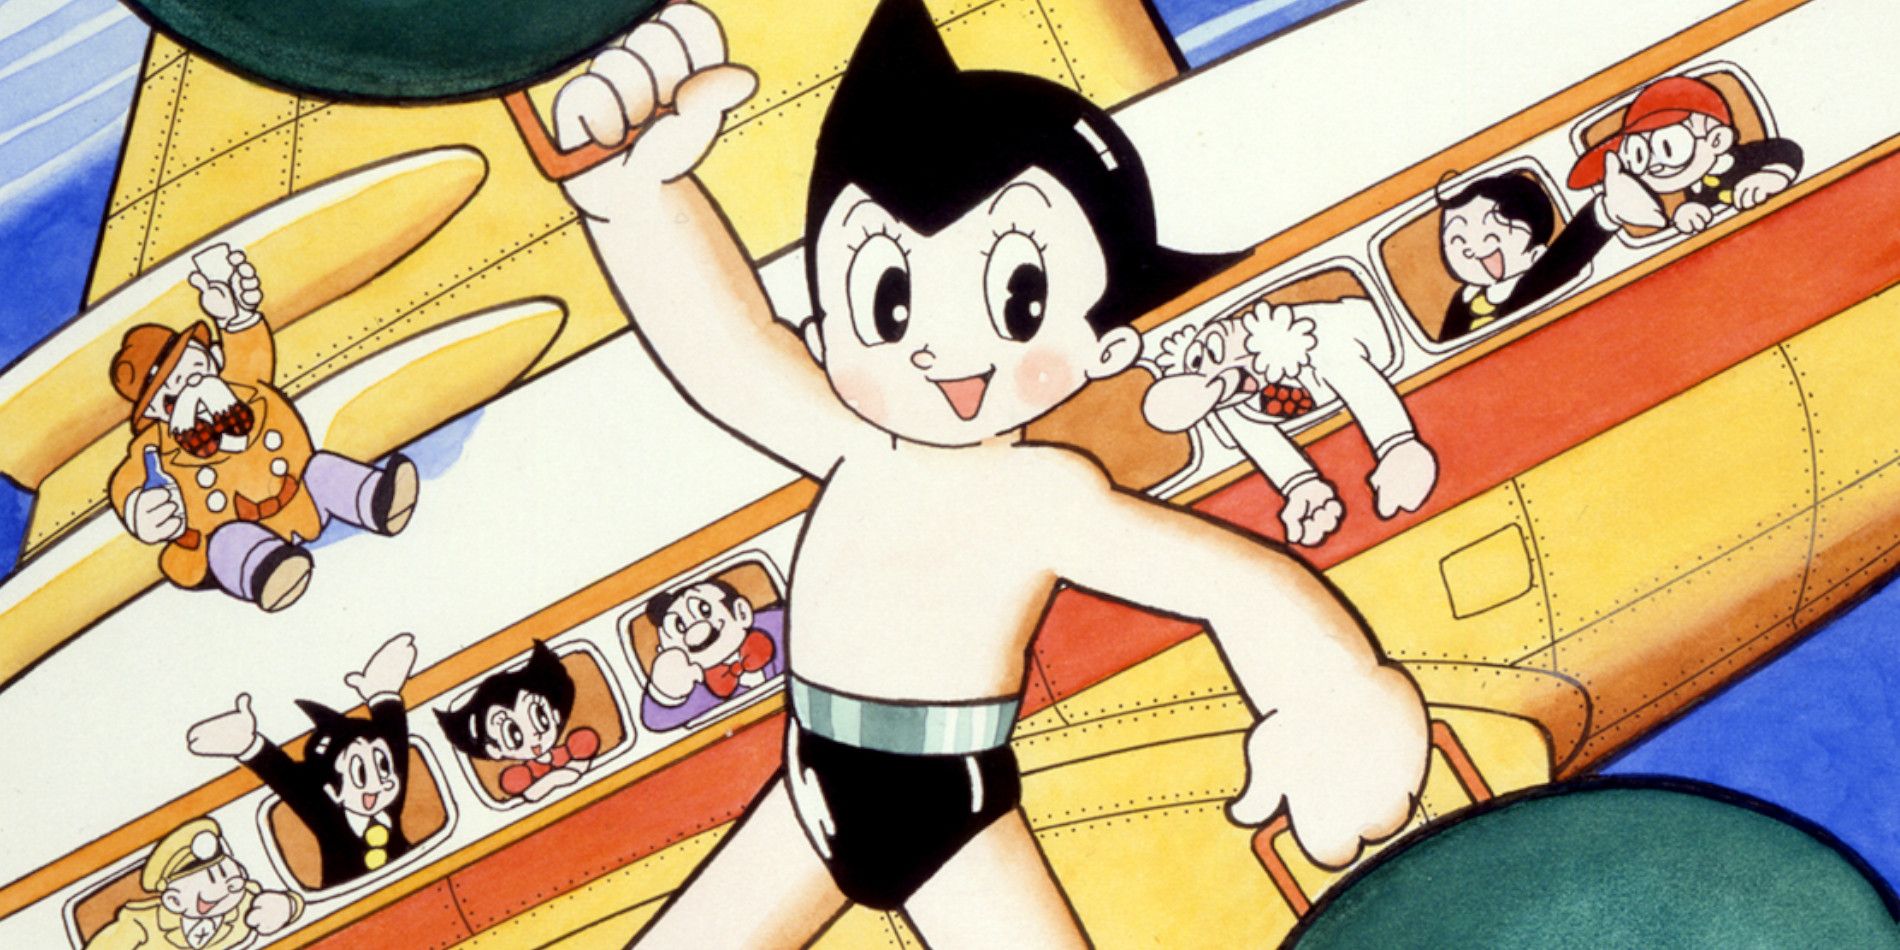 How Astro Boy Became One of the Most Famous Animated Franchises